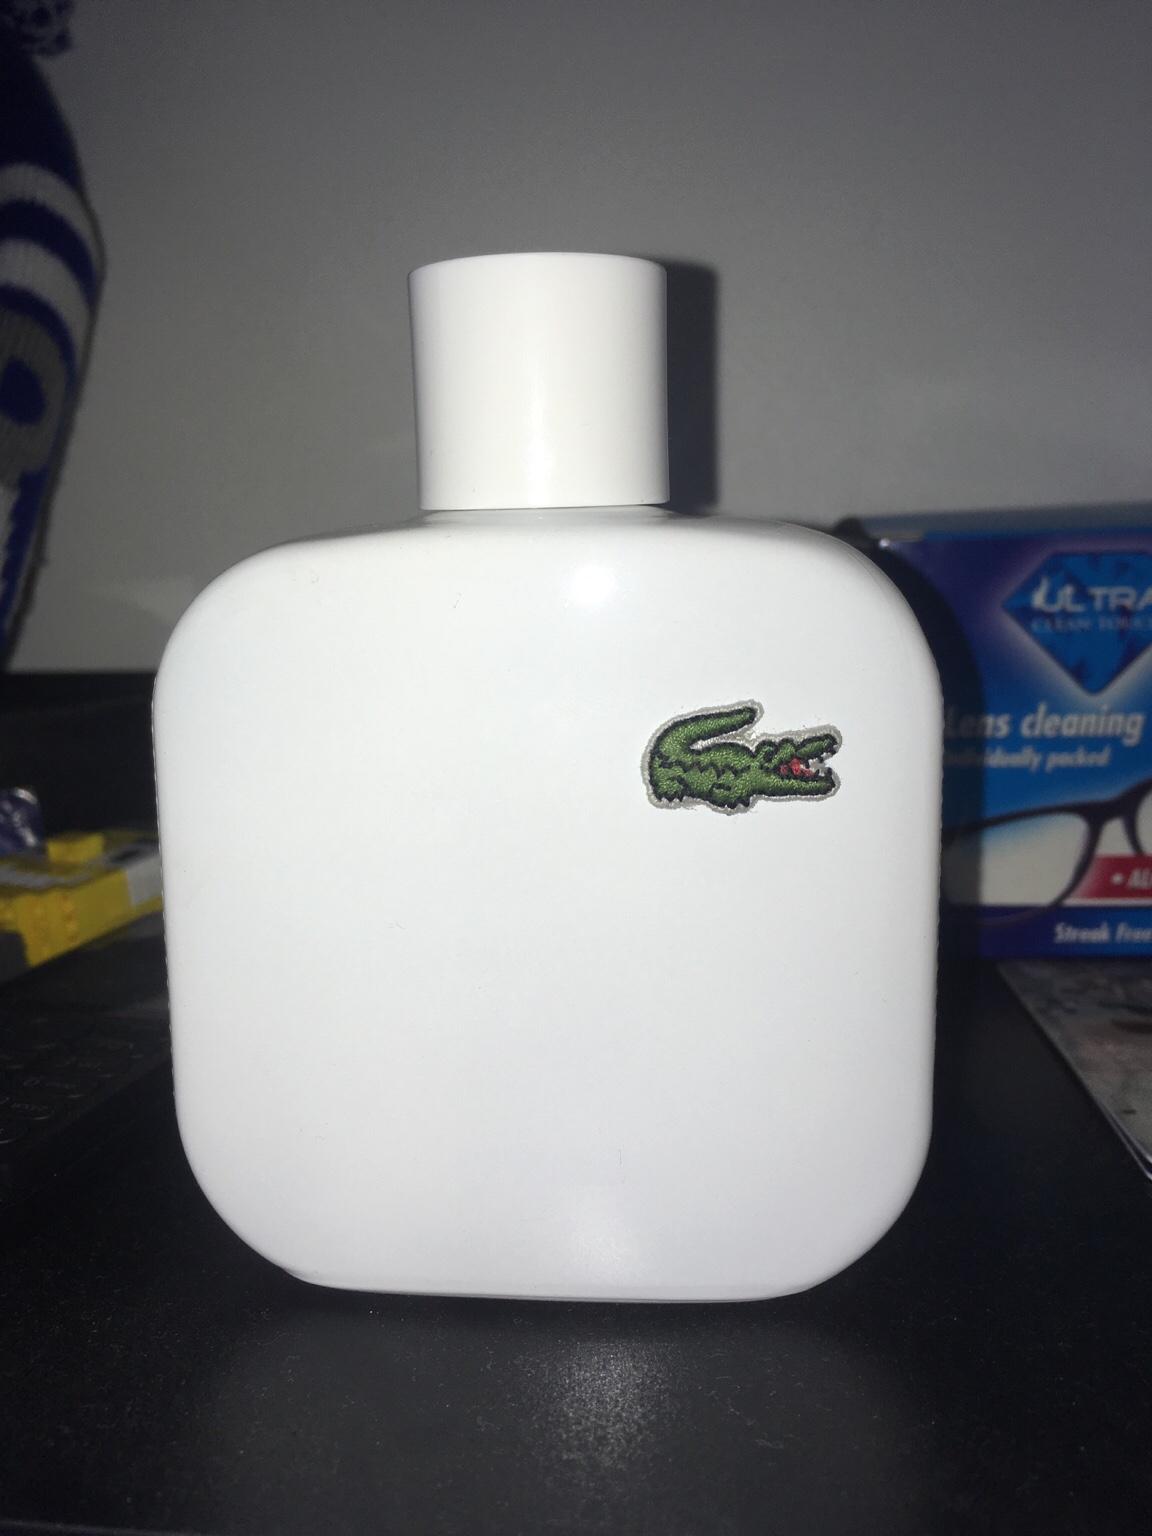 lacoste aftershave 100ml